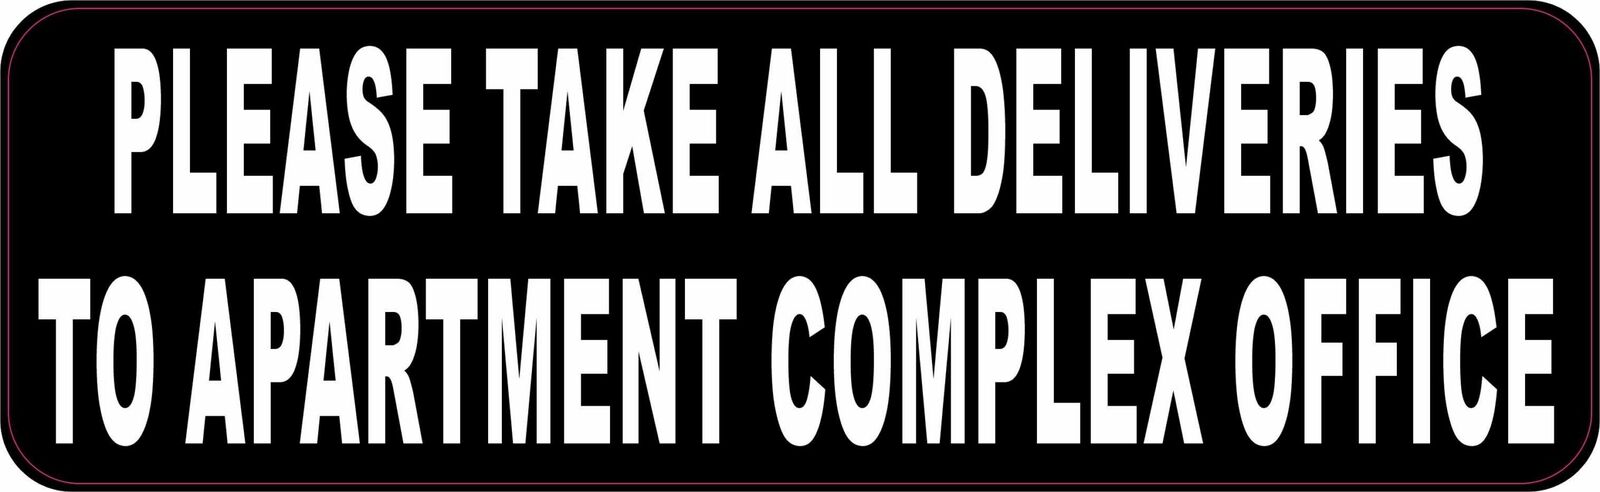 10in x 3in All Deliveries to Apartment Complex Office Vinyl Sticker Sign Decal